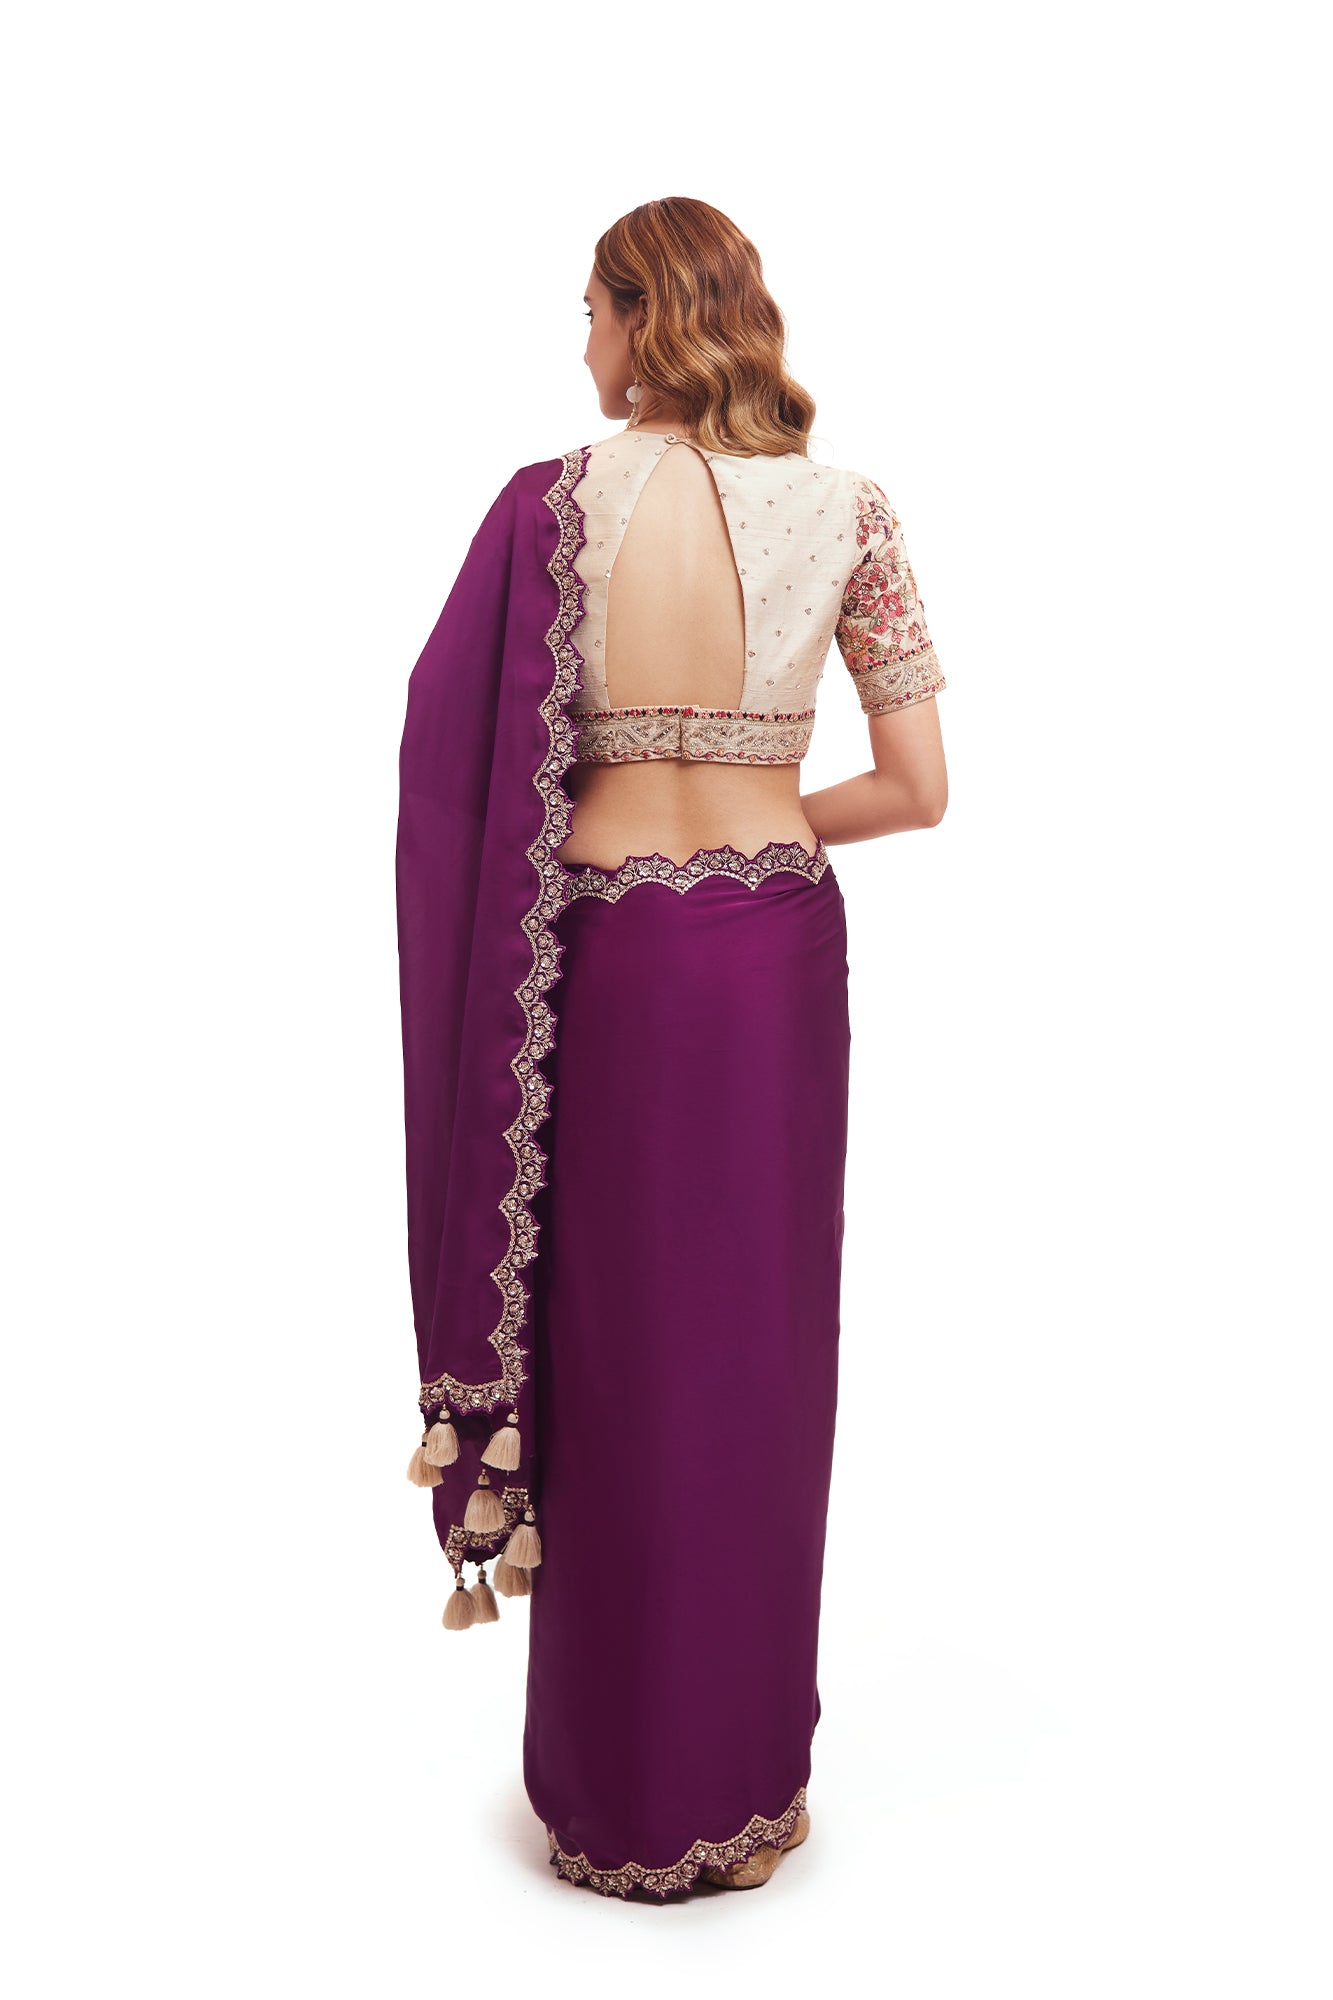 Shop purple organza satin saree online in USA with embroidered saree blouse. Look your best at parties and weddings in beautiful designer sarees, embroidered sarees, handwoven sarees, silk sarees, organza saris from Pure Elegance Indian saree store in USA.-back